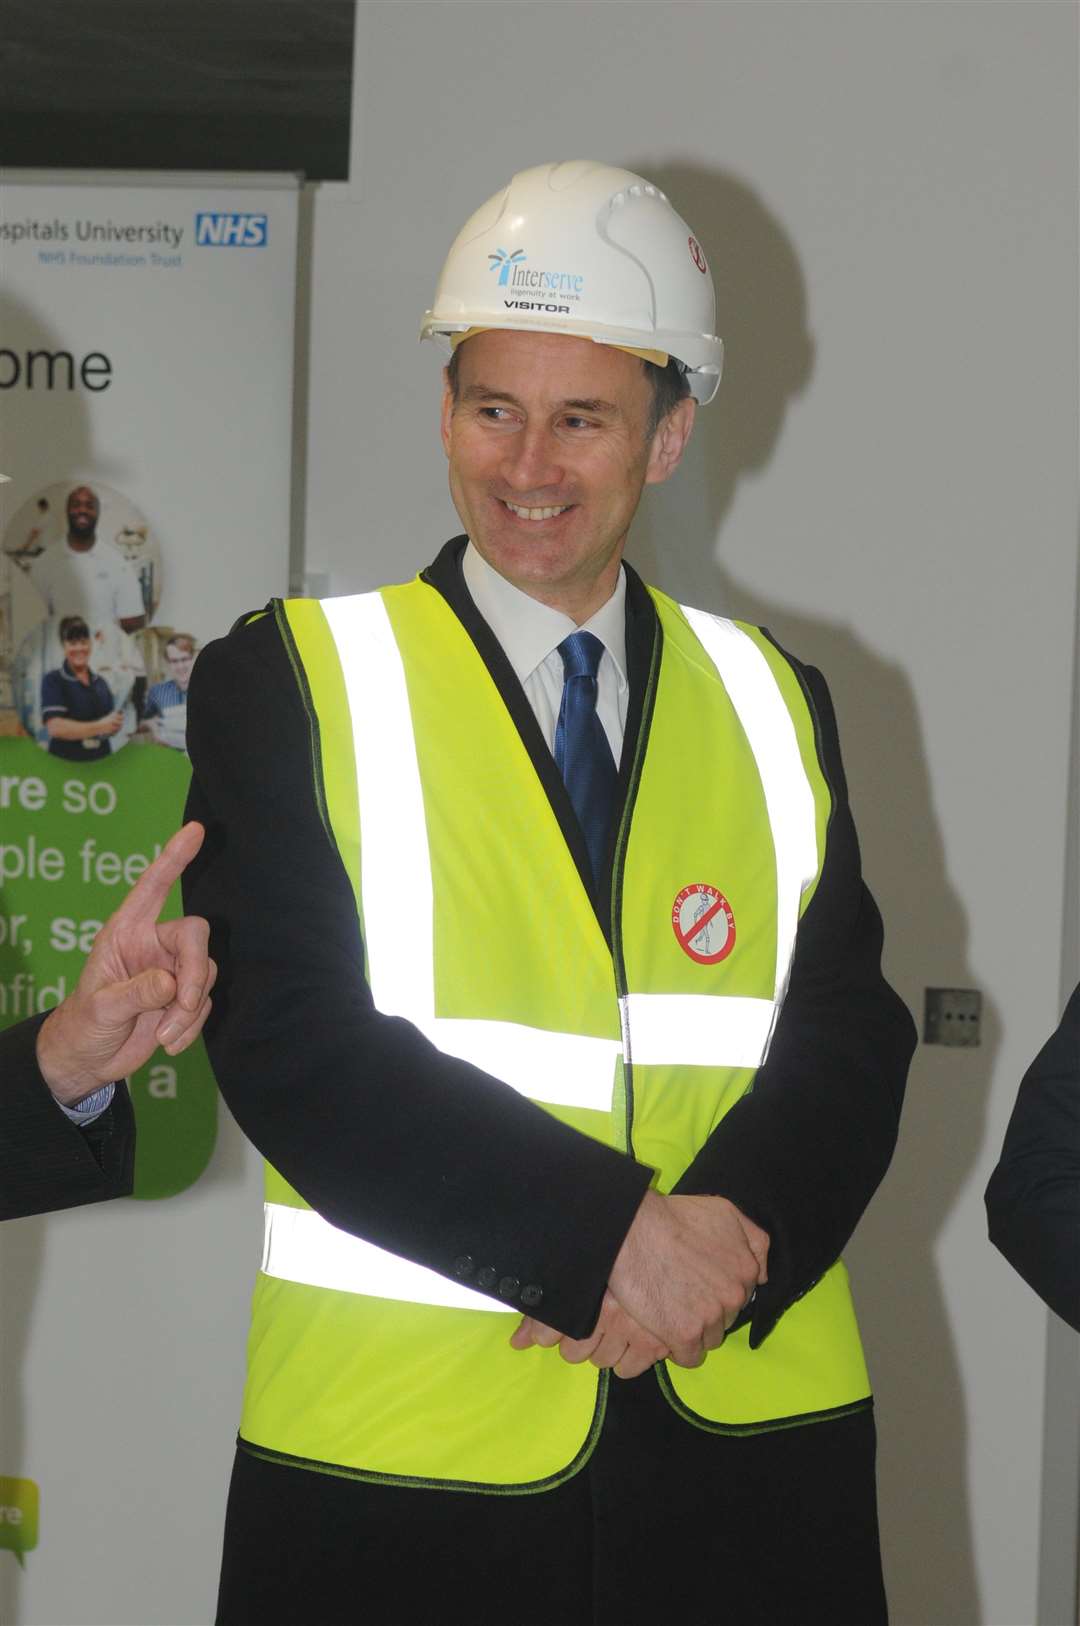 Health Secretary Jeremy Hunt says the opening of the new hospital is a big step forward